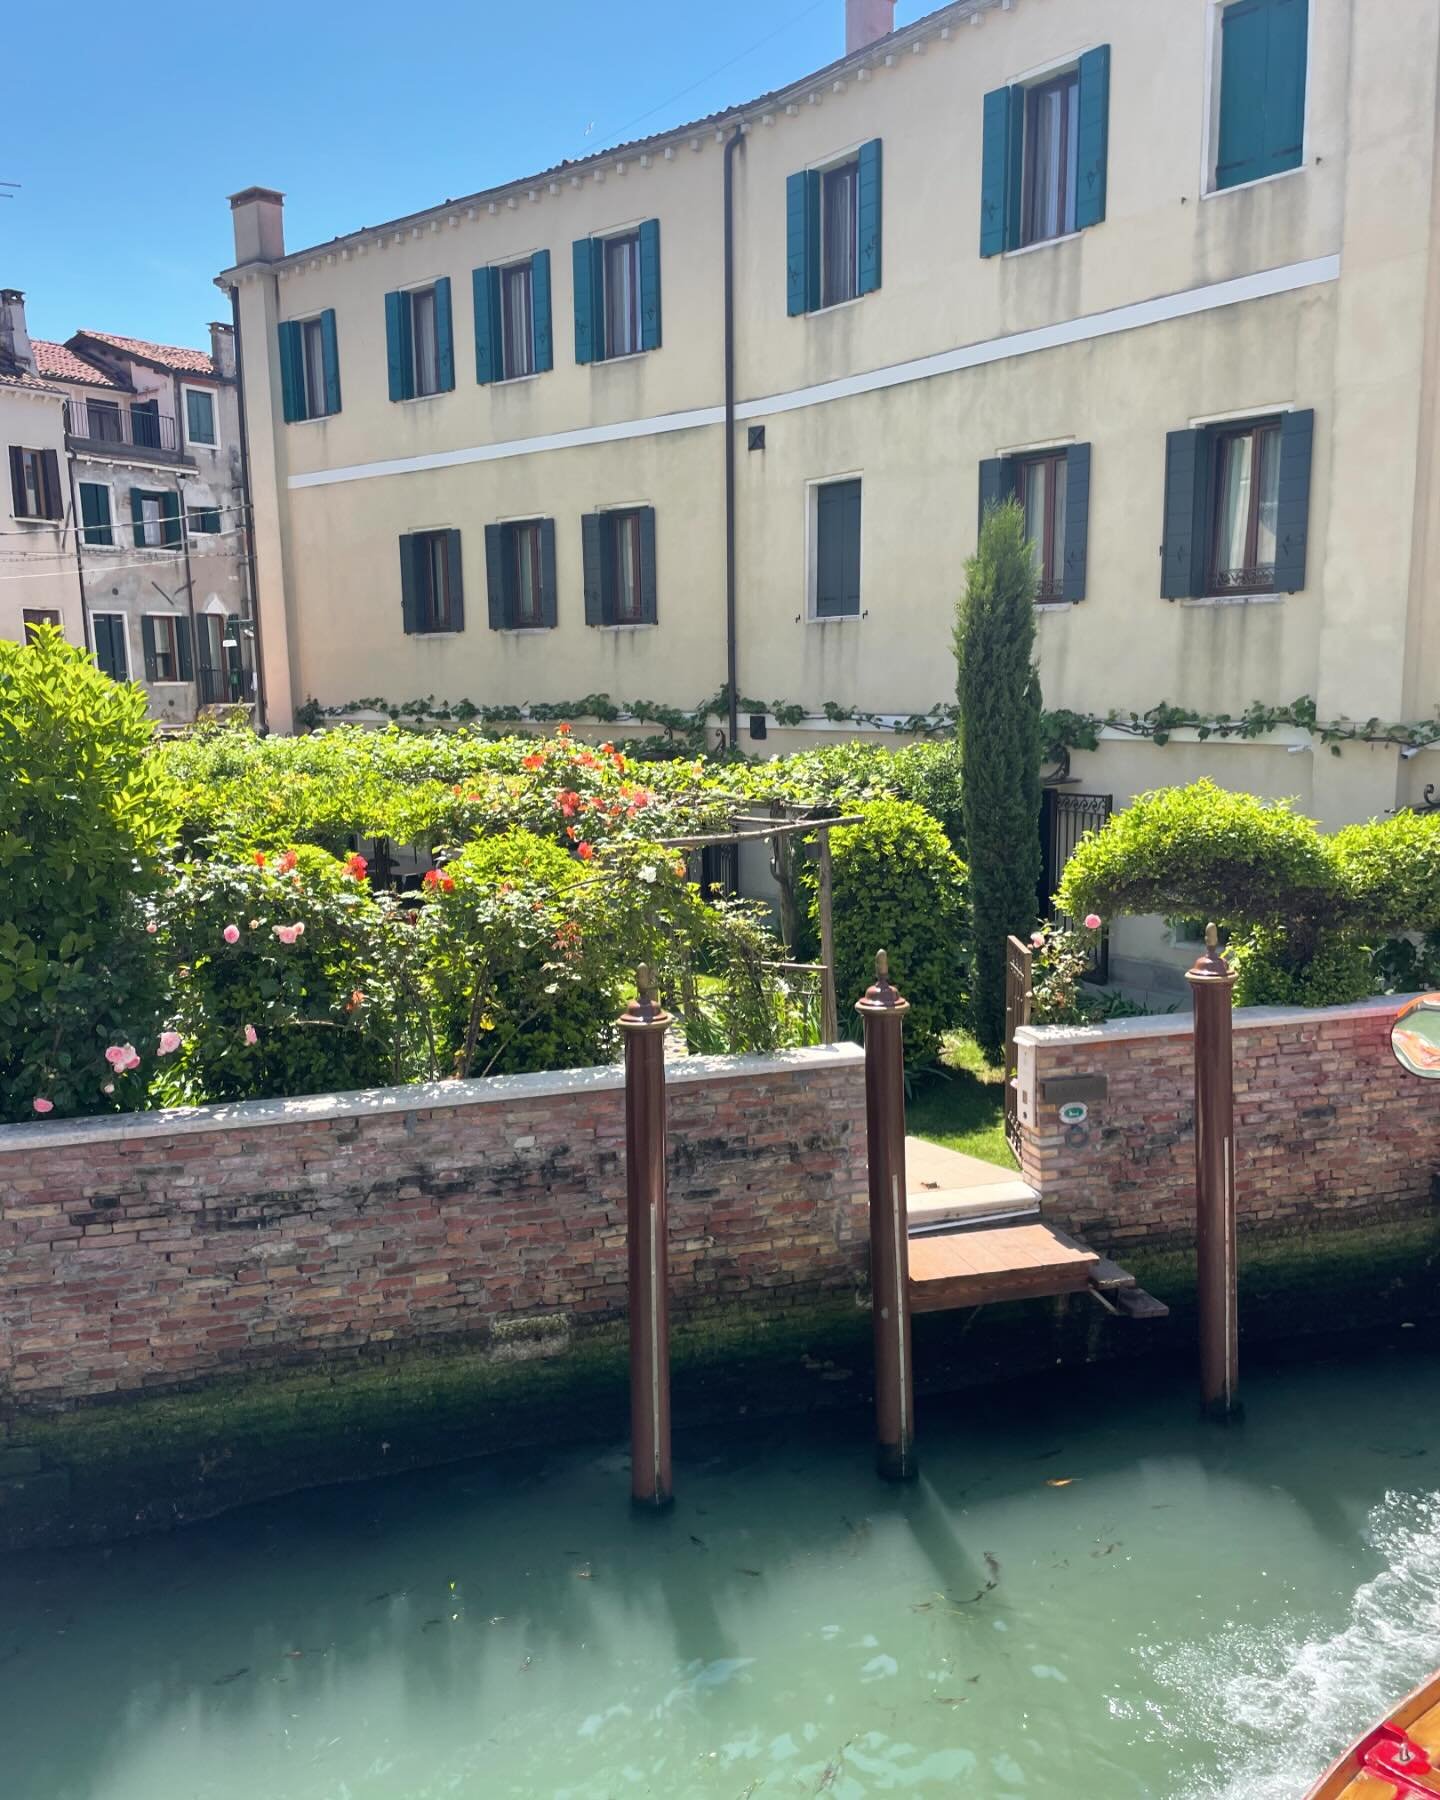 A Venetian weekend before starting our Madoo tour today of gardens and villas of the Veneto.  Be on the lookout for the Madoo tote in some rather extraordinary spots.  Lots of art this weekend including Zen Fanzhi in an exhibition designed by Tadep A